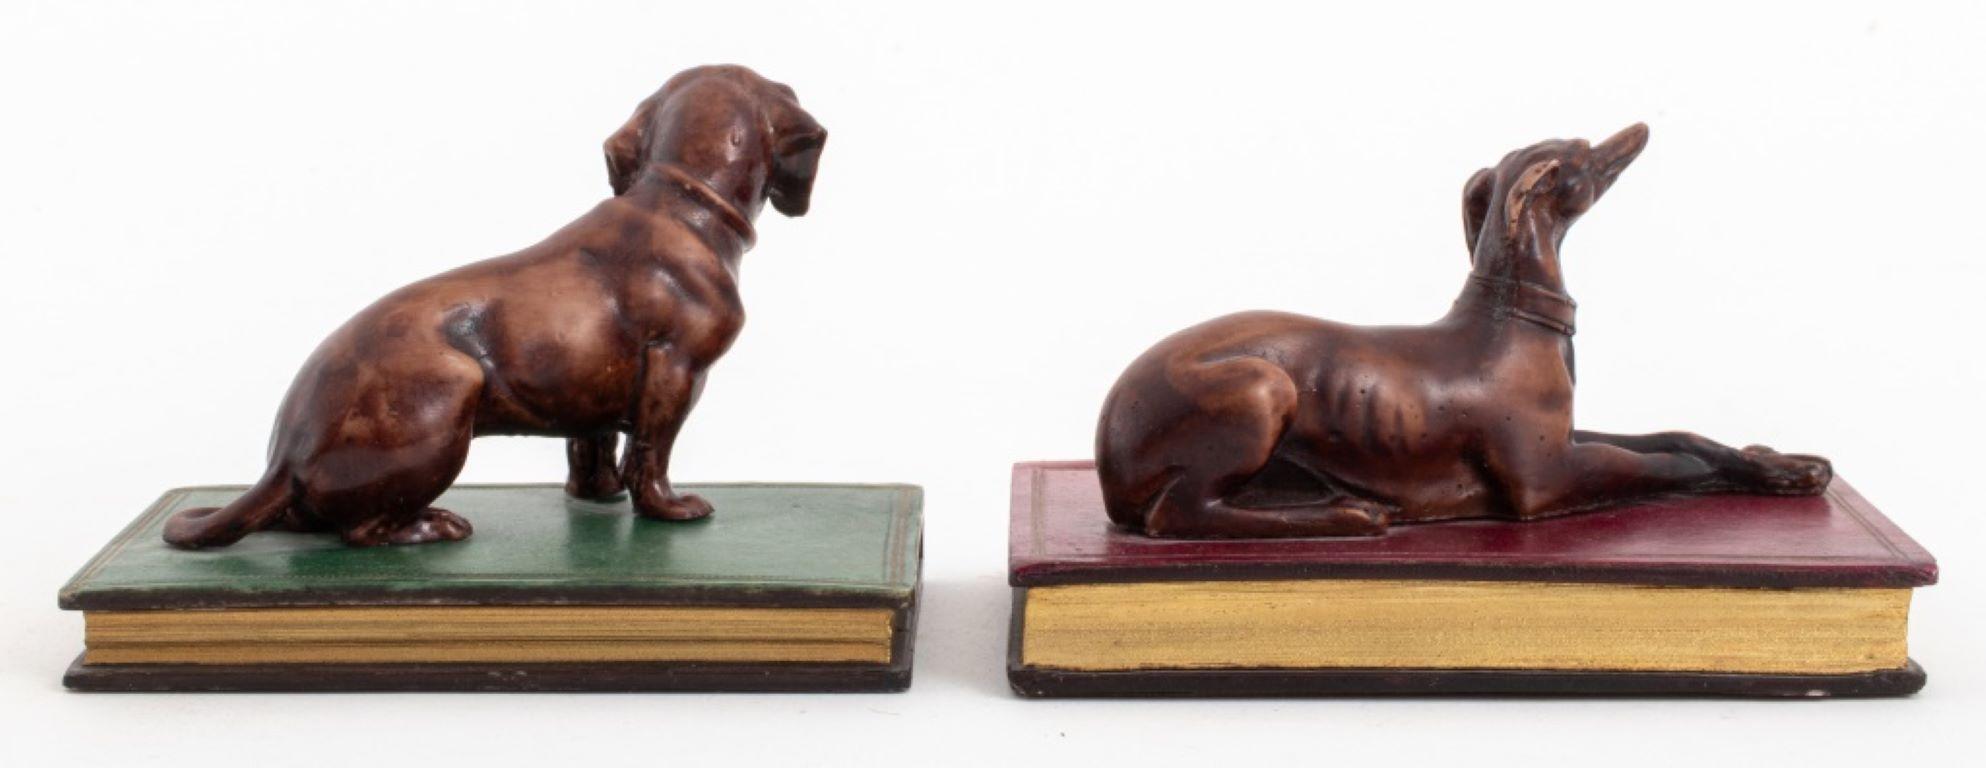 20th Century Leather Bounded Books With Dog Paperweight, 2